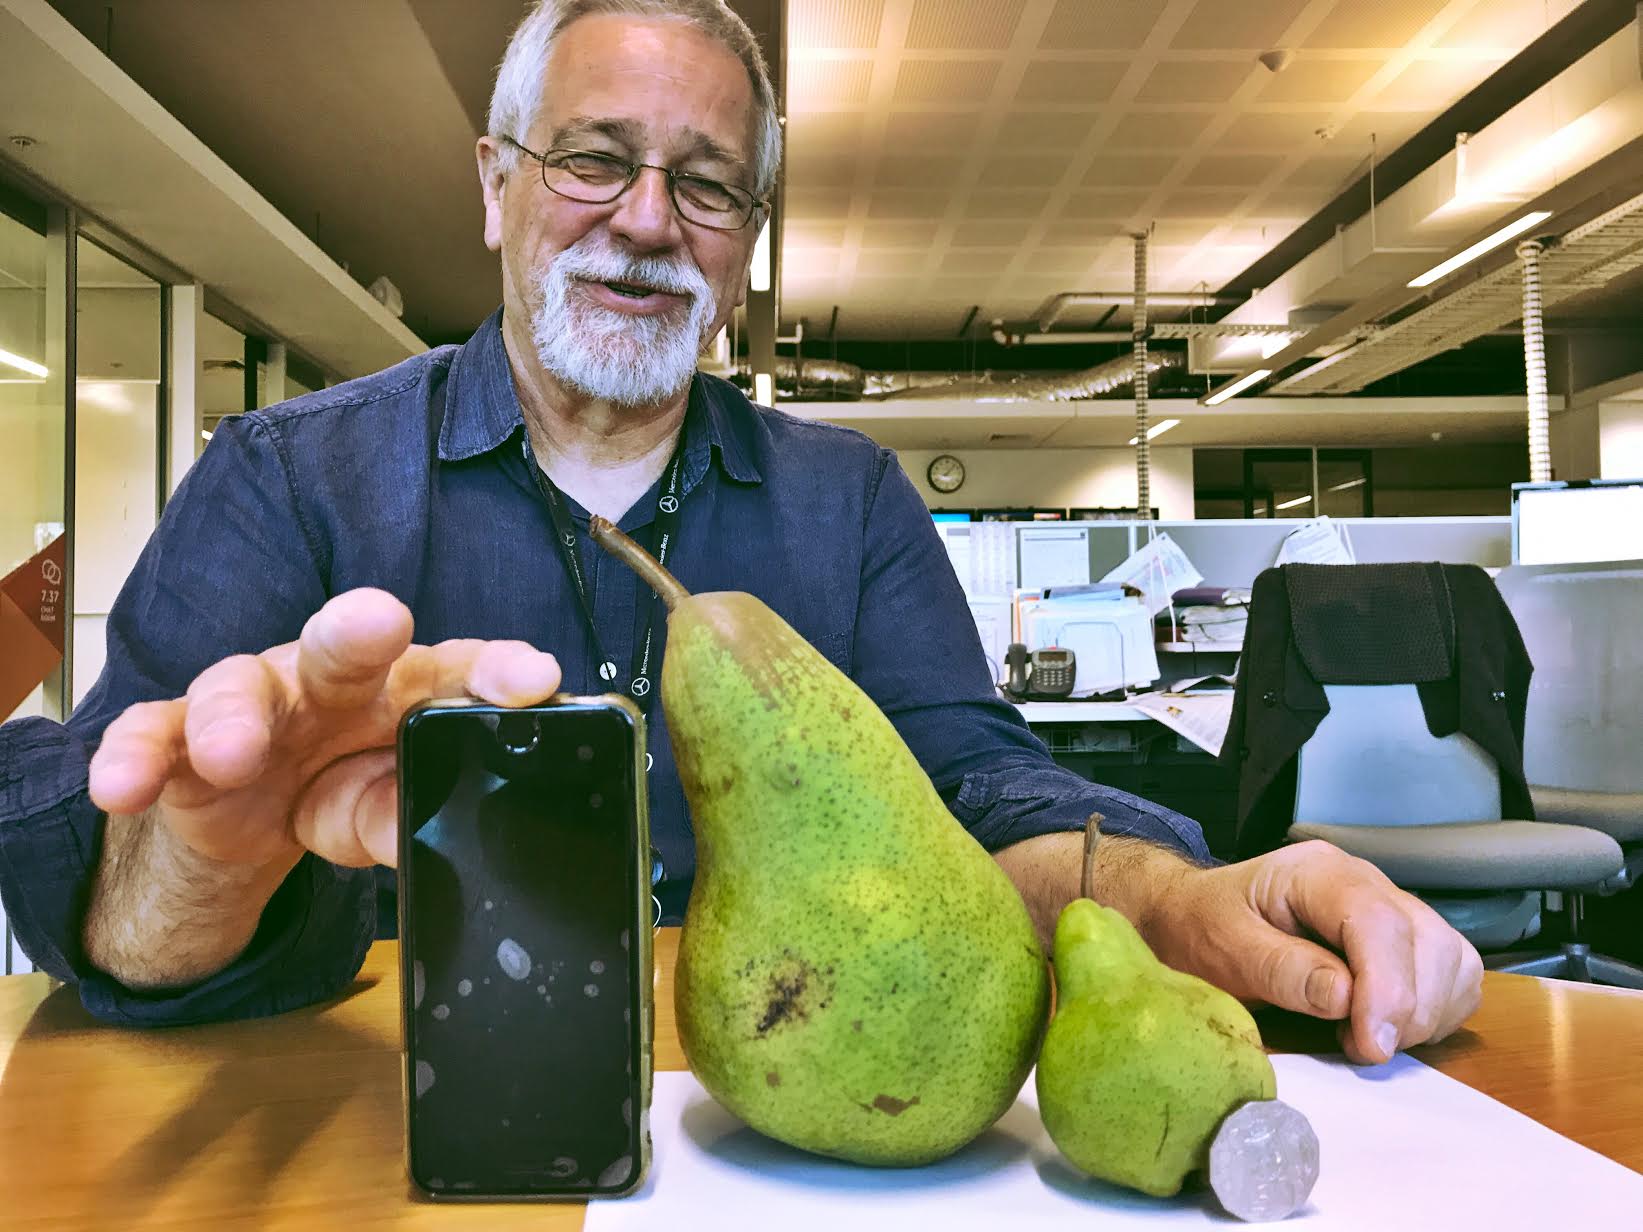 Article image for Oversized fruit: Has Neil stumbled across a trend?